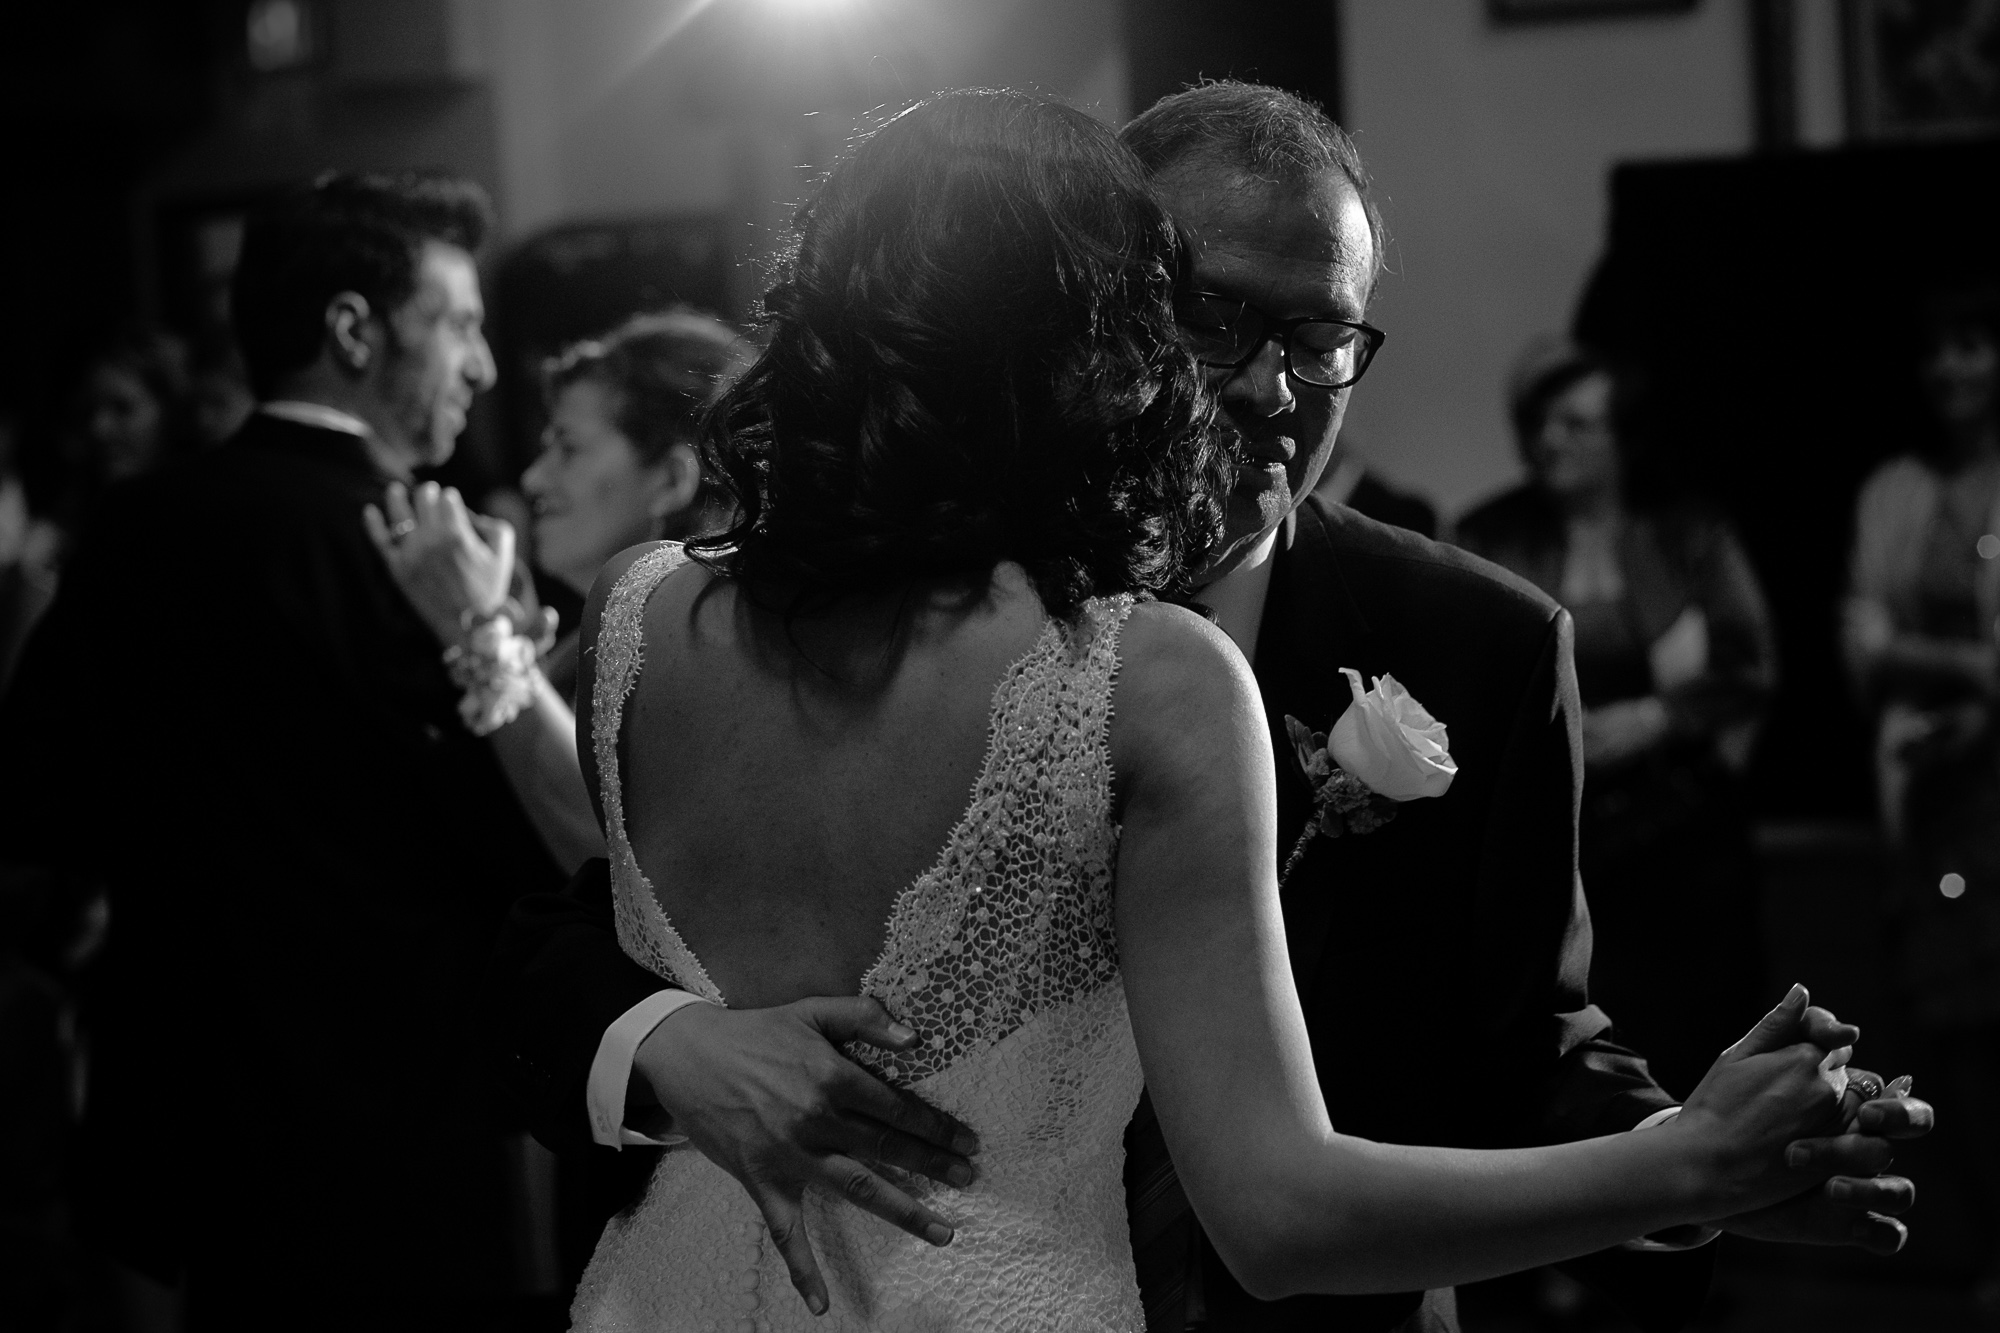  Maria dances with her father during the Toronto wedding reception while Theo dances with his mother in the background. 